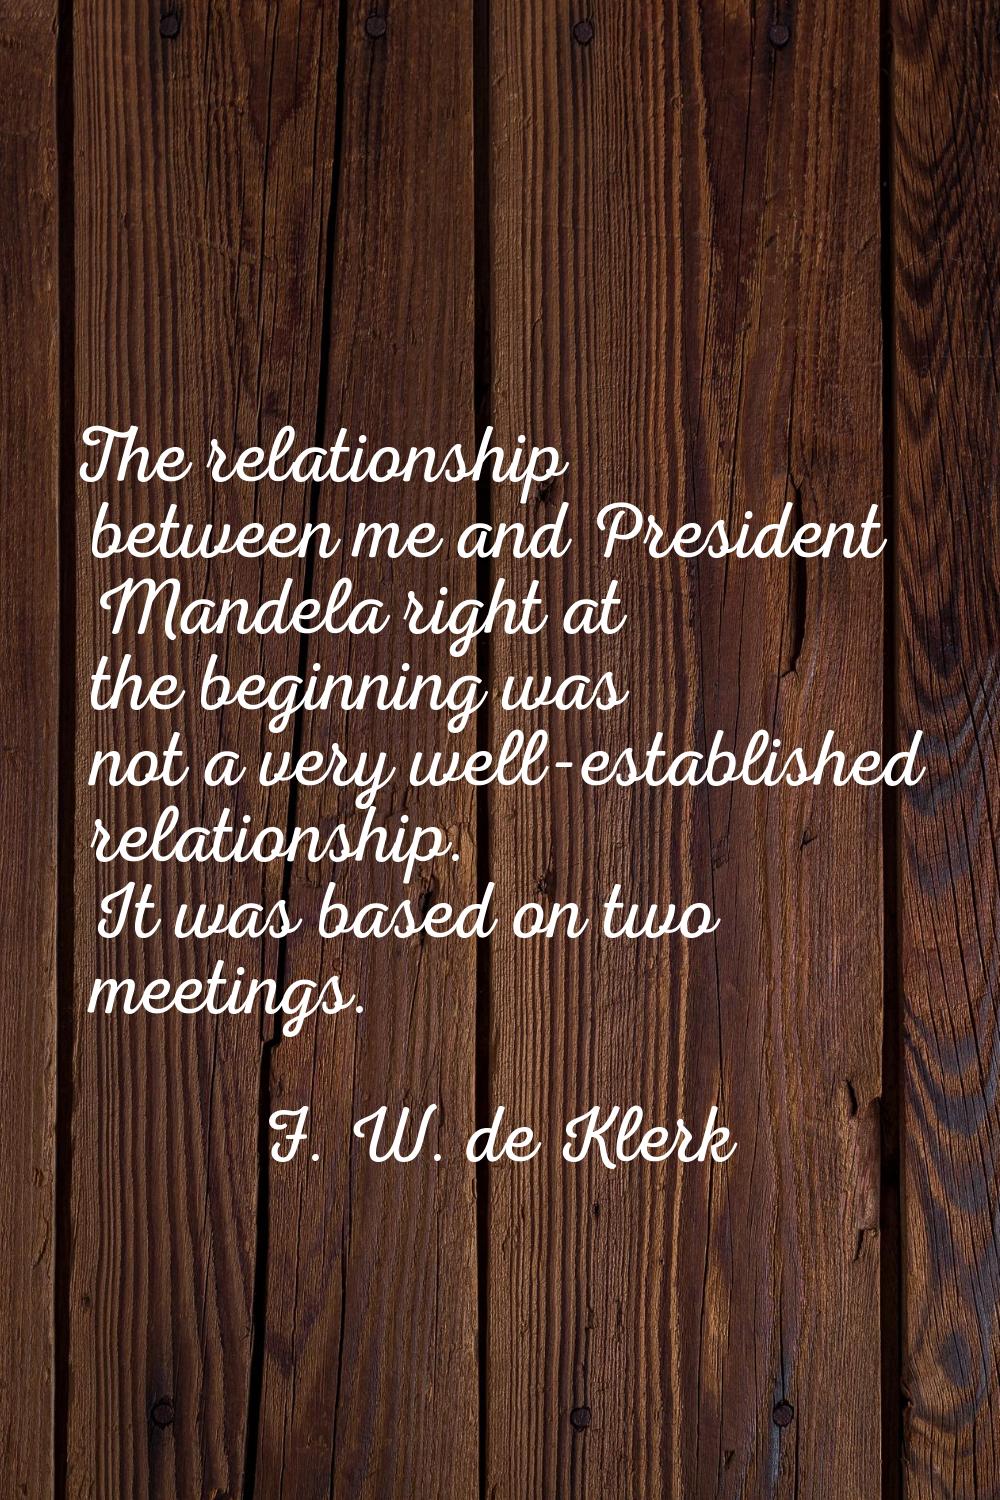 The relationship between me and President Mandela right at the beginning was not a very well-establ